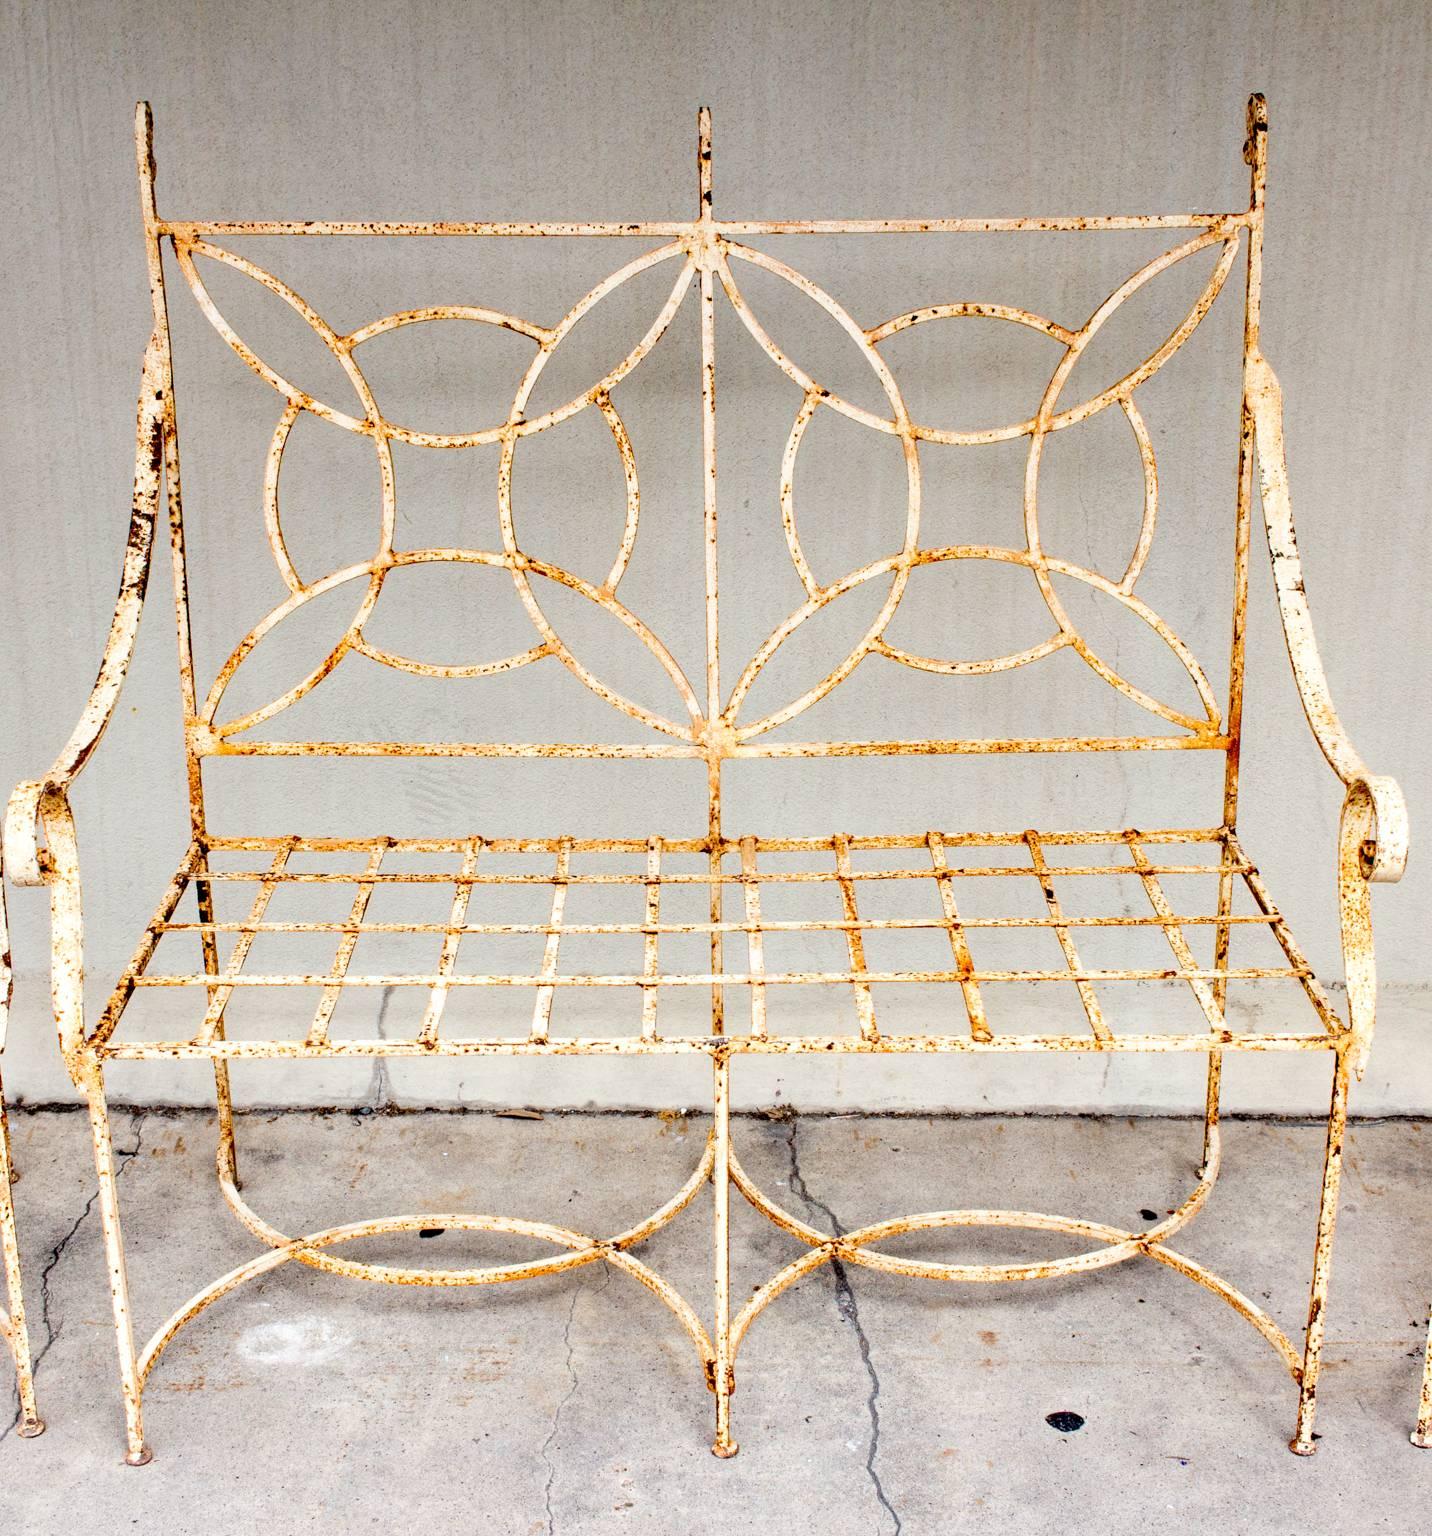 This wonderful, geometric-styled iron garden set features a pair of armchairs with a matching settee, in a distressed painted finish. The top layer of paint is a creamy ivory, and although it has seen better days, we feel the rustic finish adds even